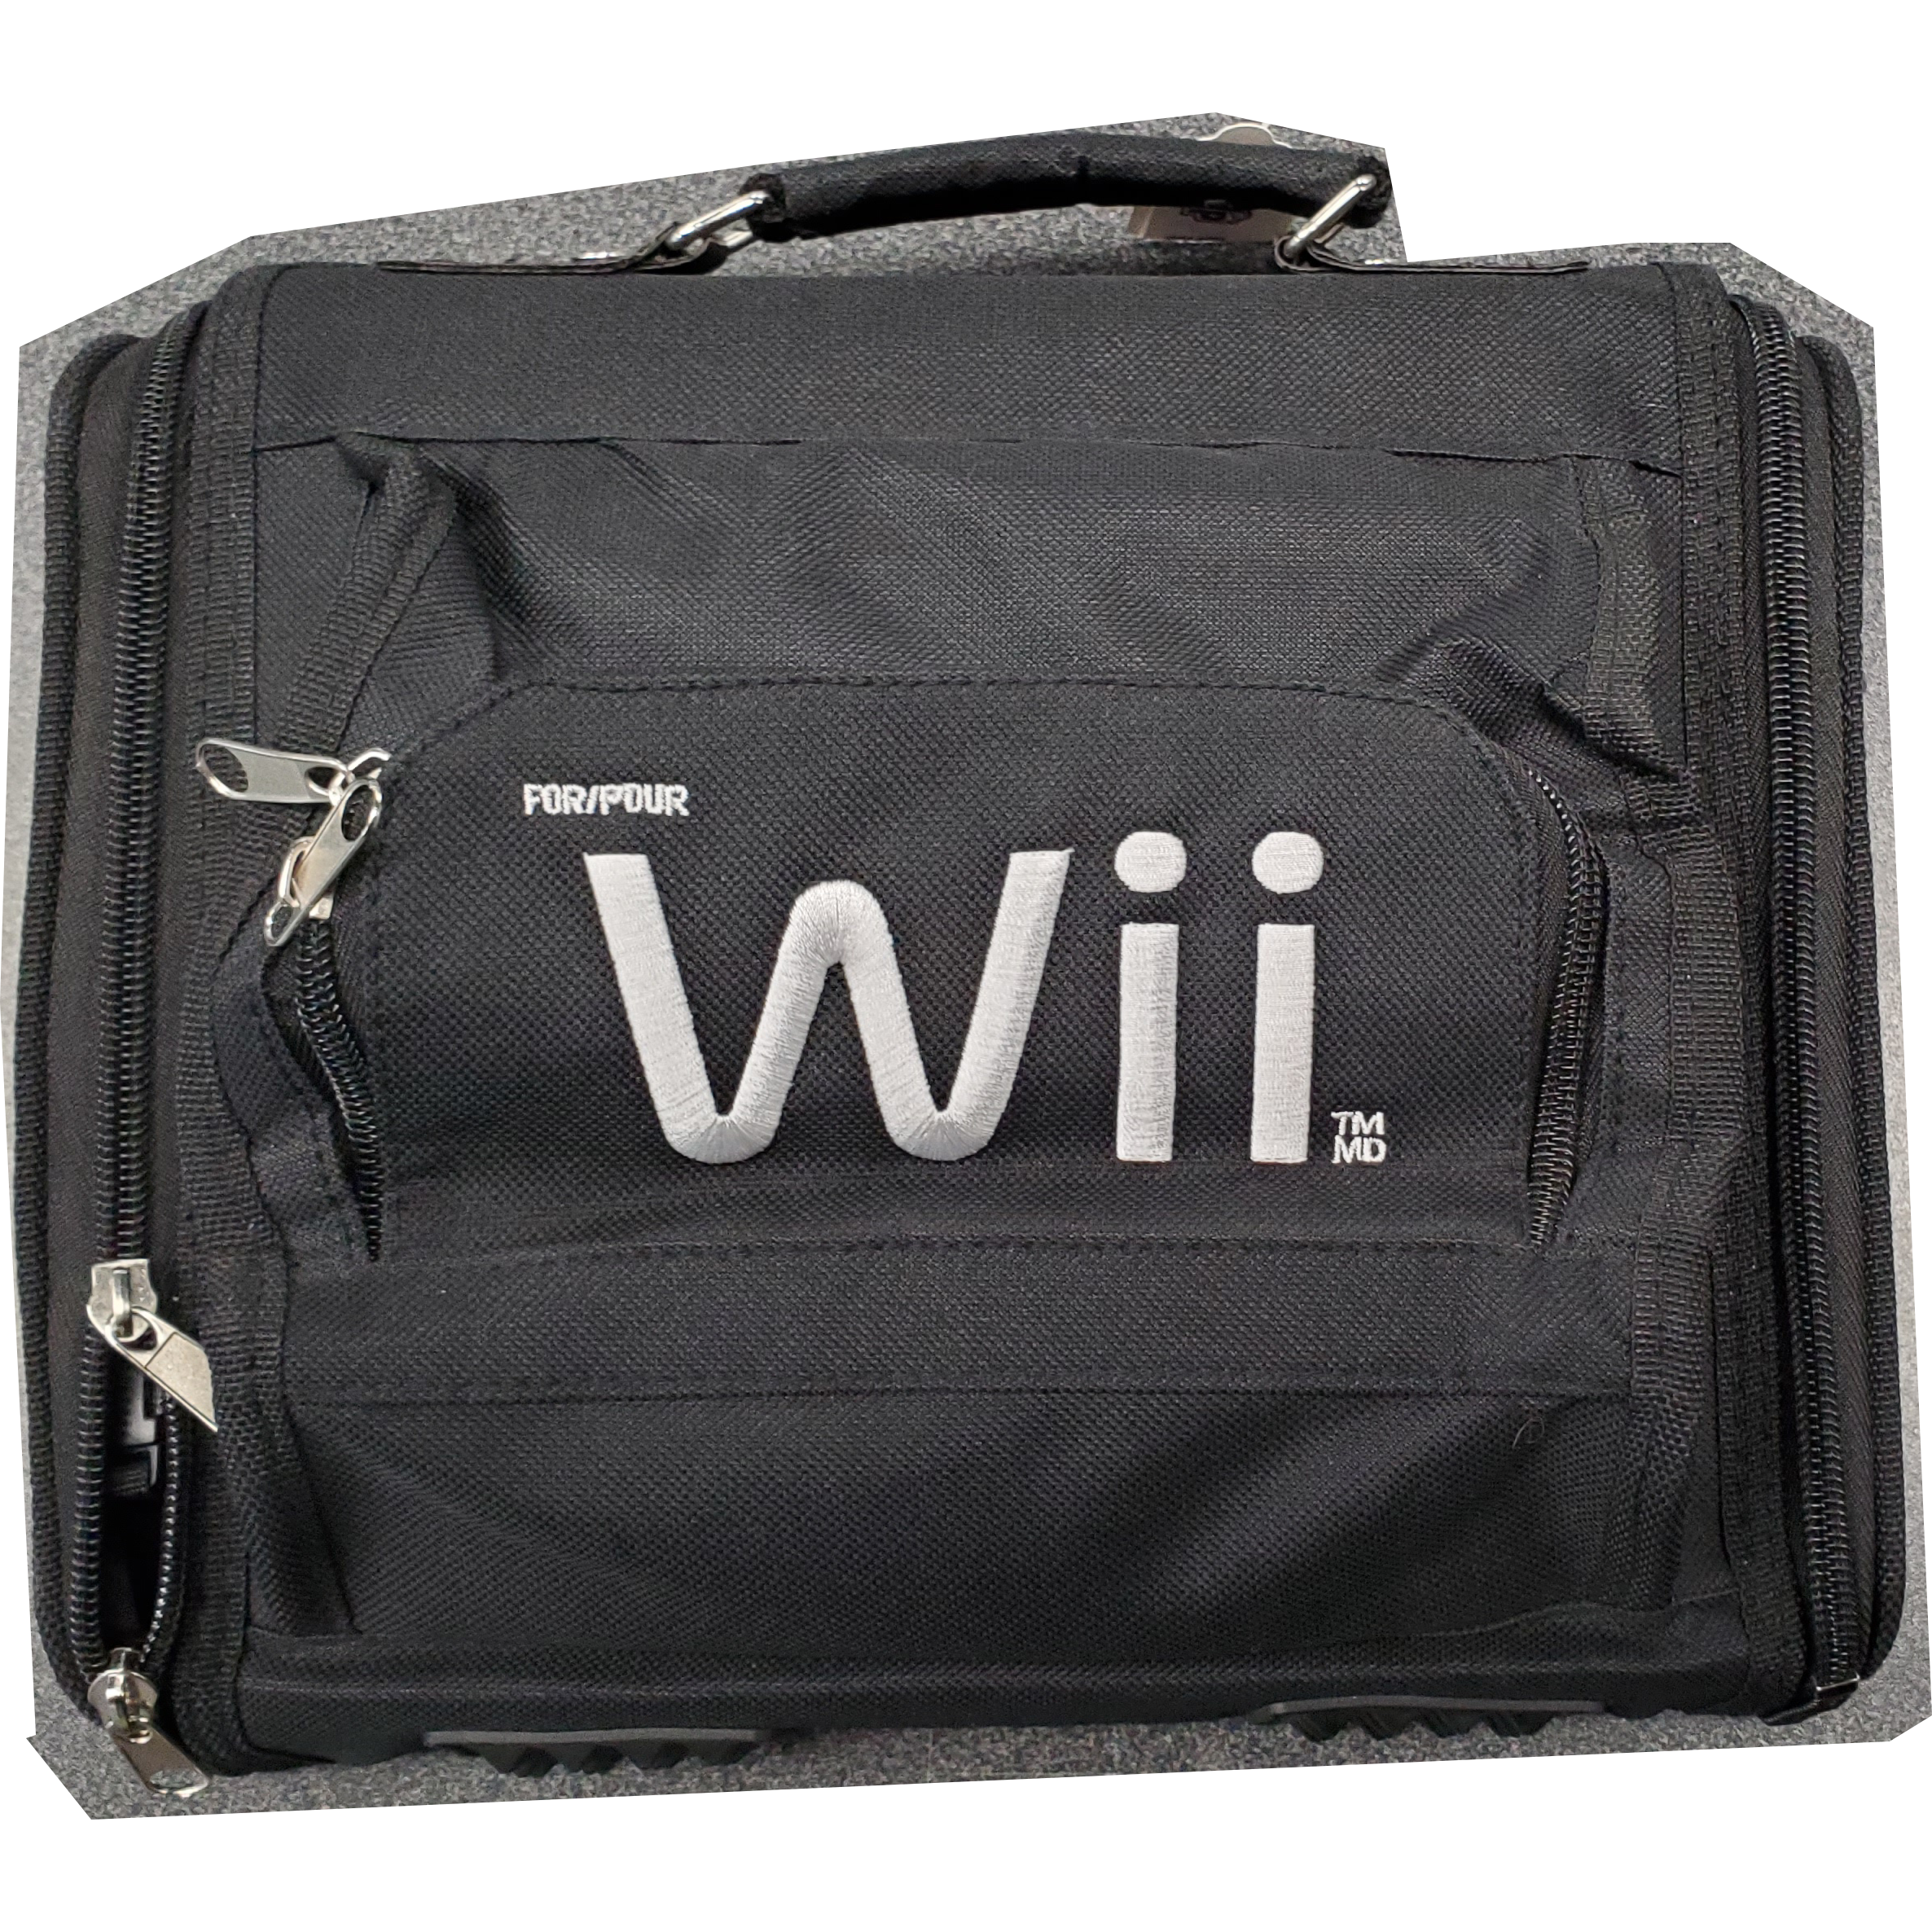 Wii System Carrying Case